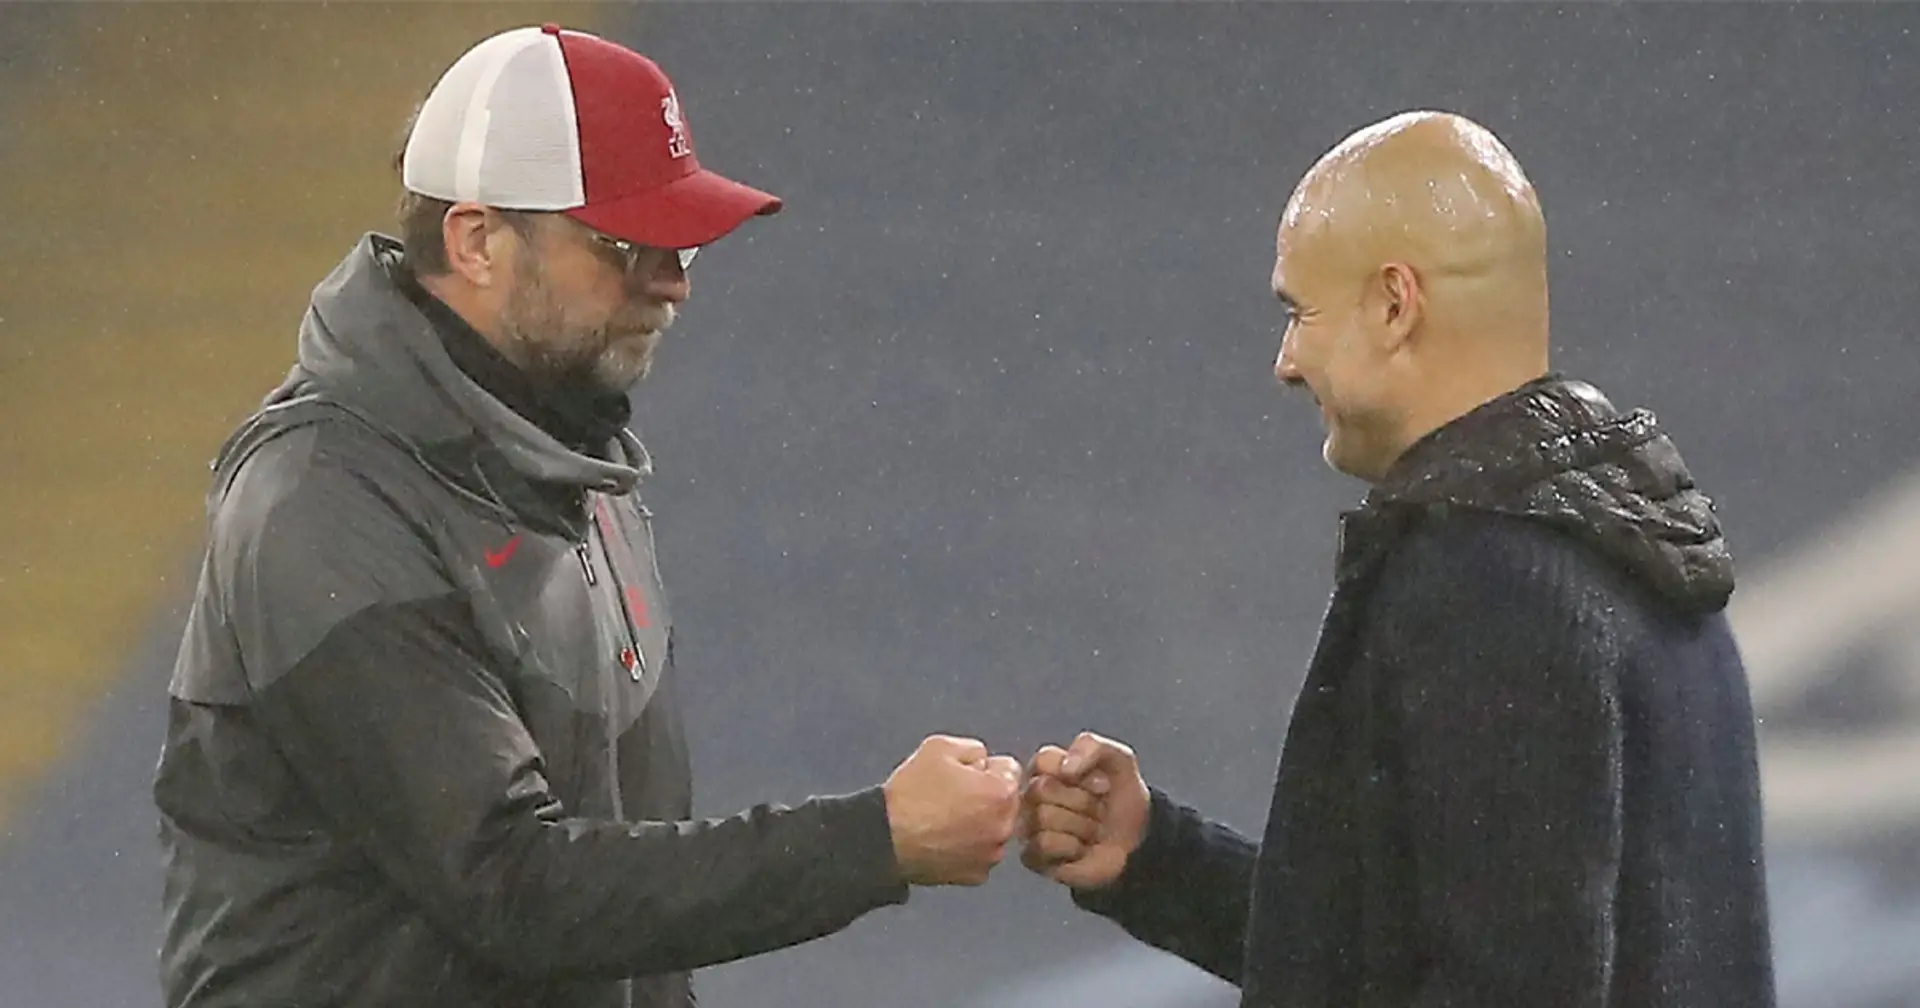 Liverpool to face Man City twice in 6 days: a look at next 5 fixtures